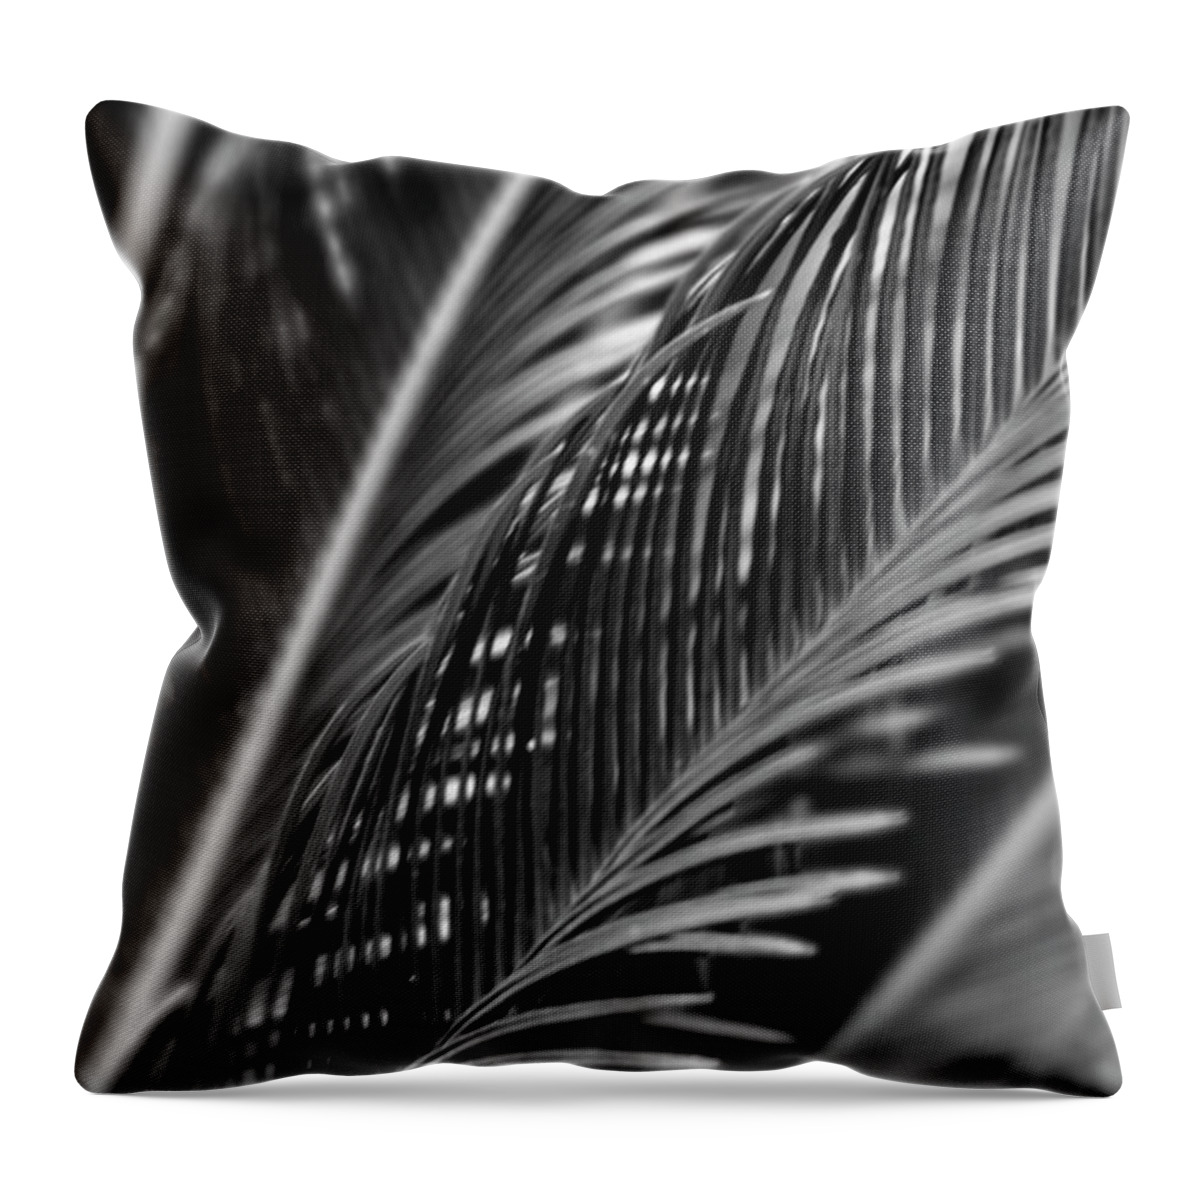 Flores Throw Pillow featuring the photograph Palm by Silvia Marcoschamer